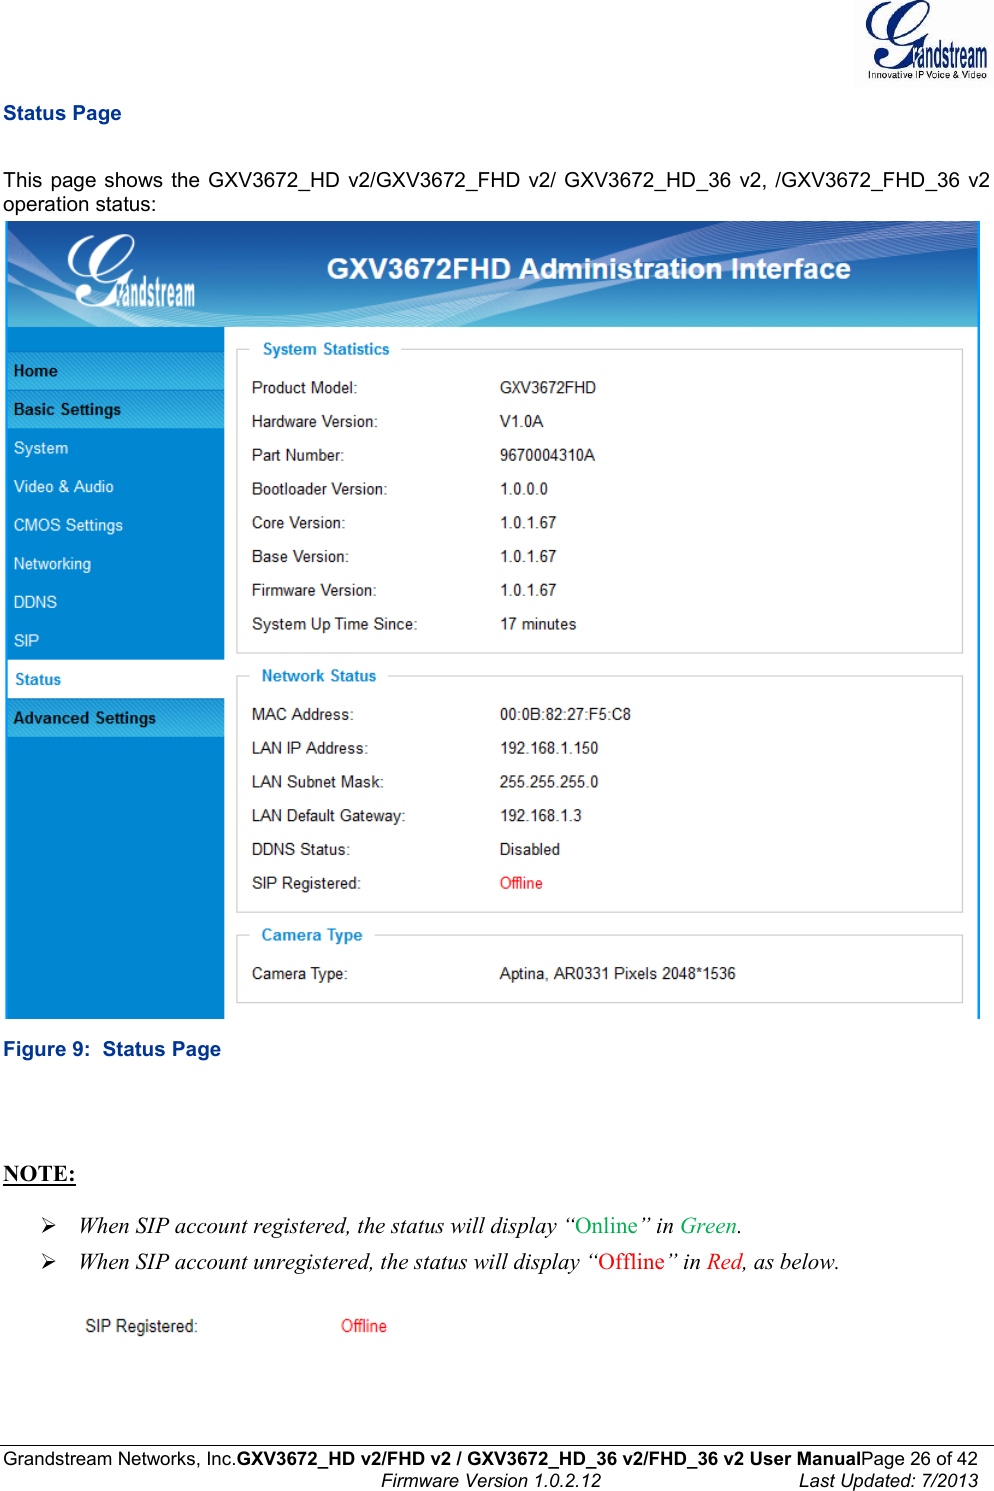  Grandstream Networks, Inc.GXV3672_HD v2/FHD v2 / GXV3672_HD_36 v2/FHD_36 v2 User ManualPage 26 of 42    Firmware Version 1.0.2.12  Last Updated: 7/2013  Status Page  This  page shows the GXV3672_HD  v2/GXV3672_FHD v2/  GXV3672_HD_36  v2, /GXV3672_FHD_36 v2 operation status:   Figure 9:  Status Page    NOTE:    When SIP account registered, the status will display “Online” in Green.  When SIP account unregistered, the status will display “Offline” in Red, as below.      